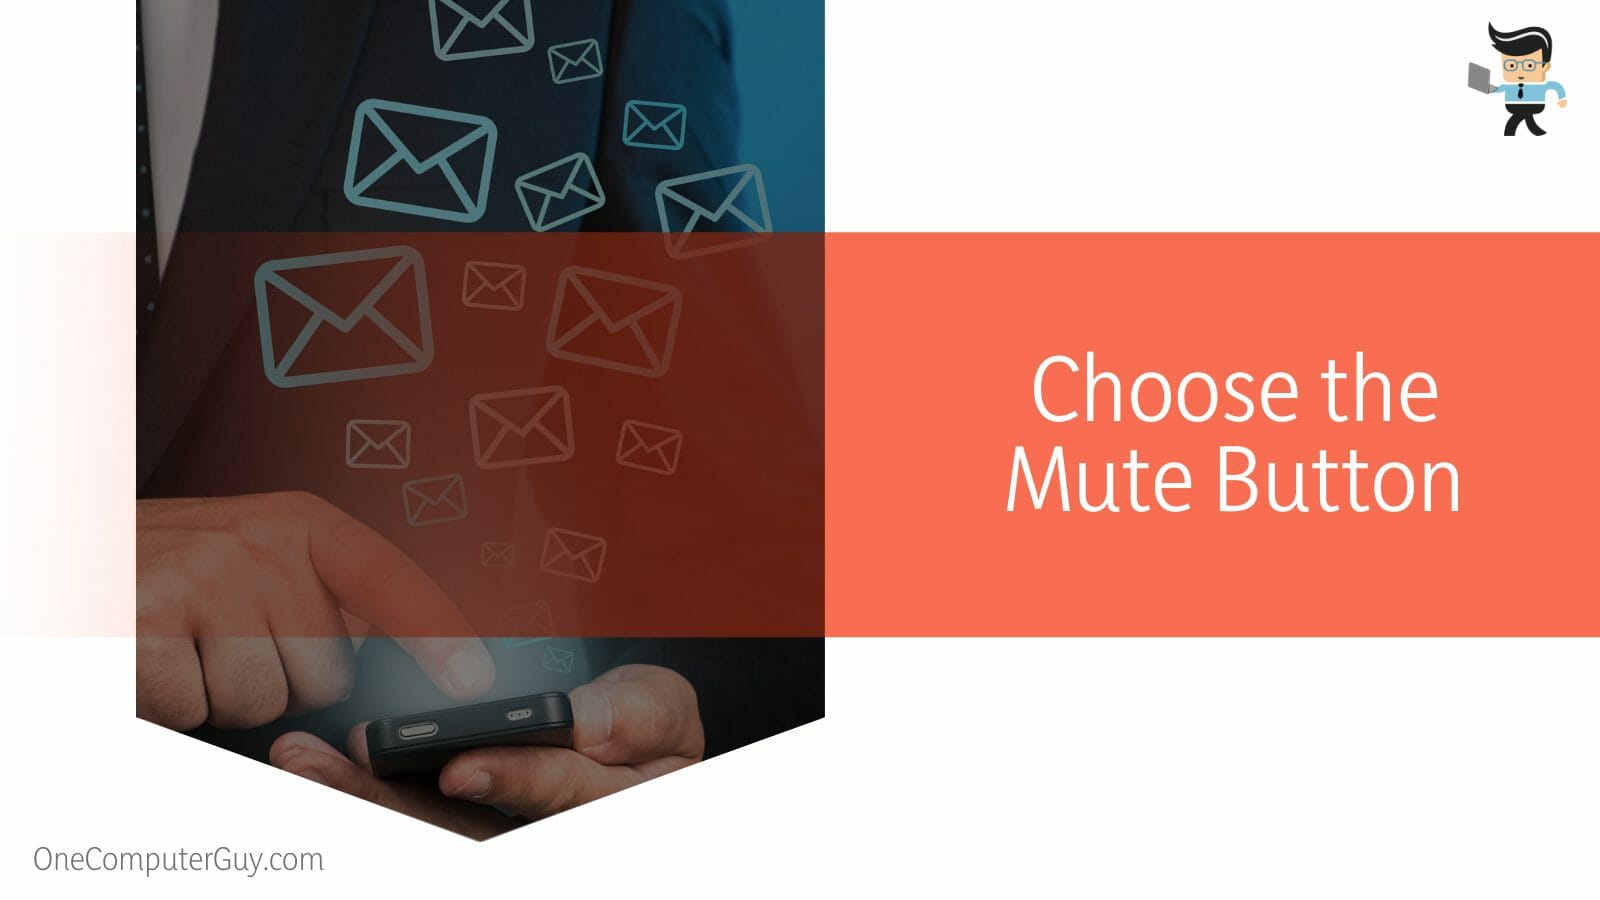 Choose the Mute Button